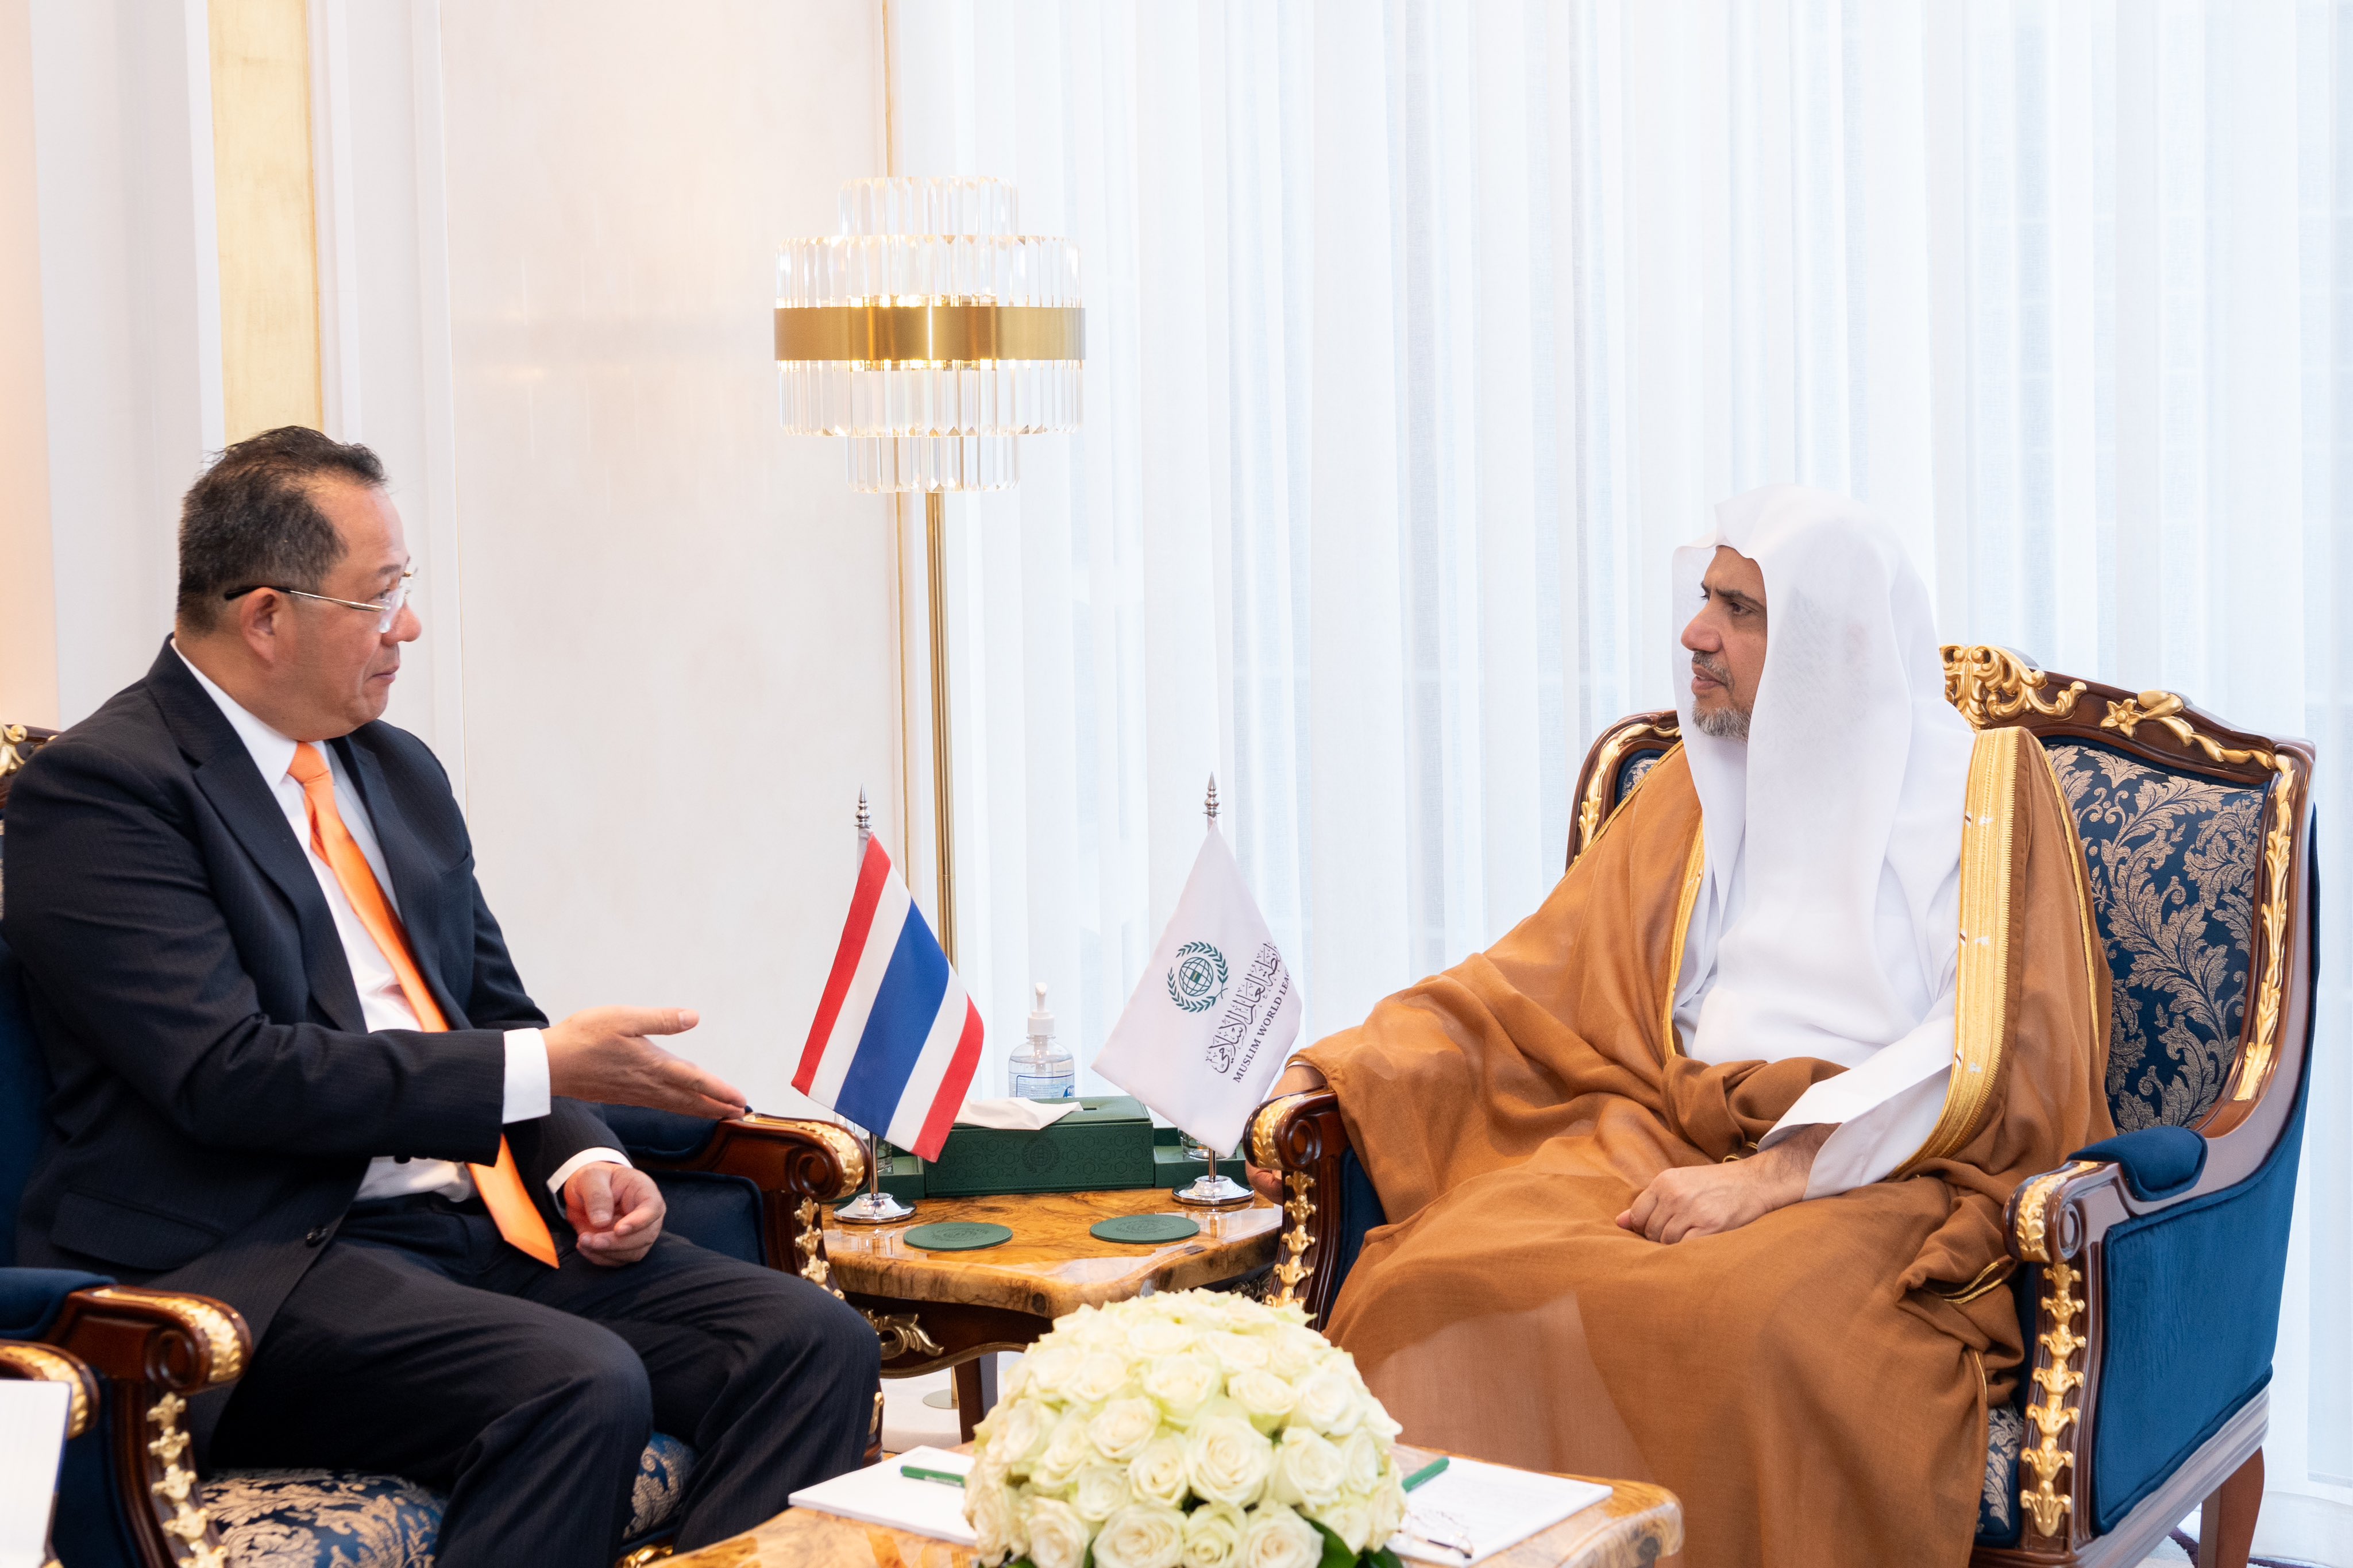 In his Riyadh office, His Excellency Sheikh Dr. Mohammed Alissa, Secretary-General of the MWL, met with His Excellency Ambassador Darm Boontham, Ambassador of Thailand to Saudi Arabia. 